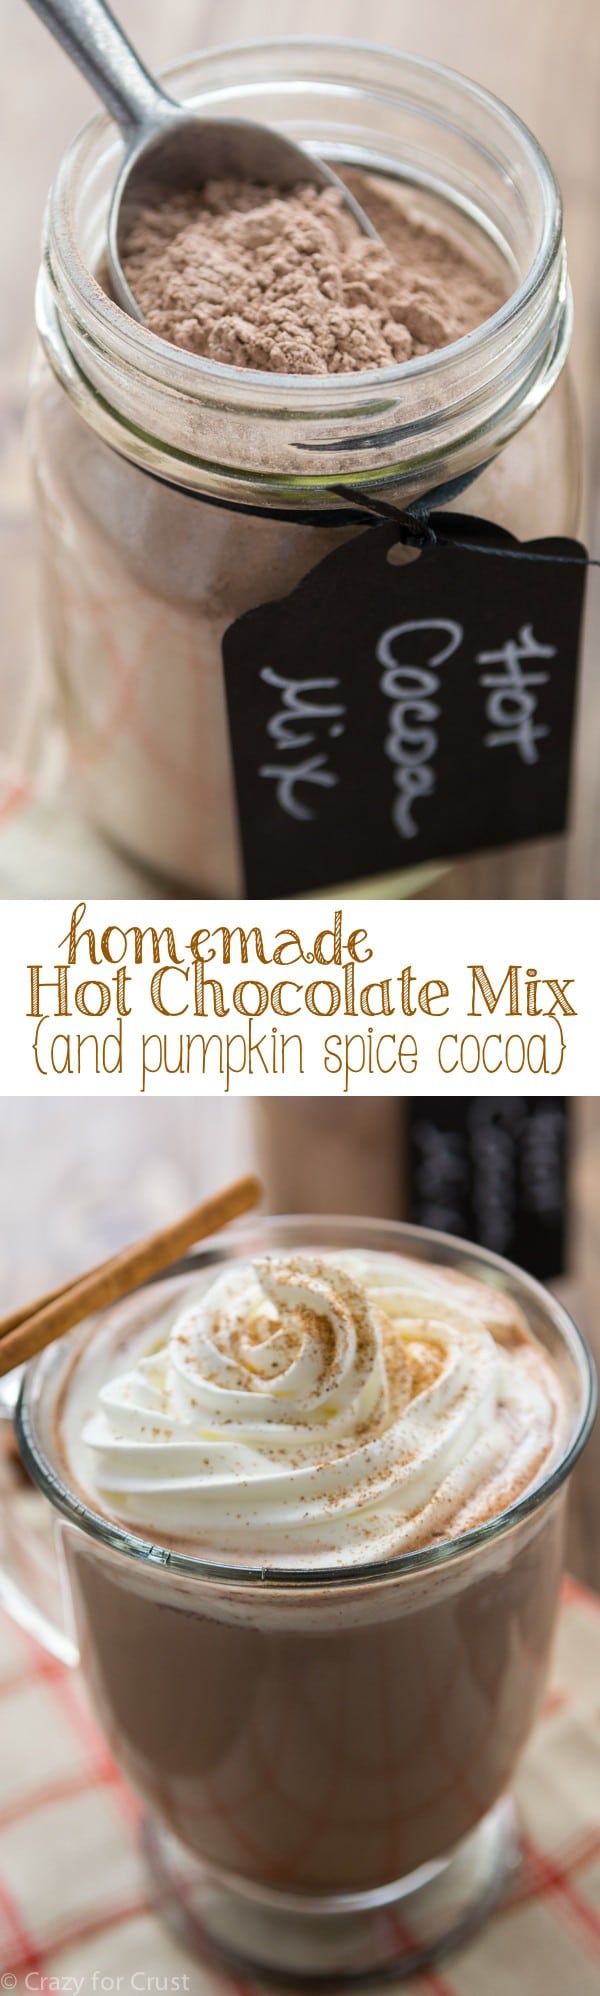 This recipe is for the best Homemade Hot Chocolate Mix. It's dairy-free and easy! Use it to make a pumpkin spice hot chocolate!